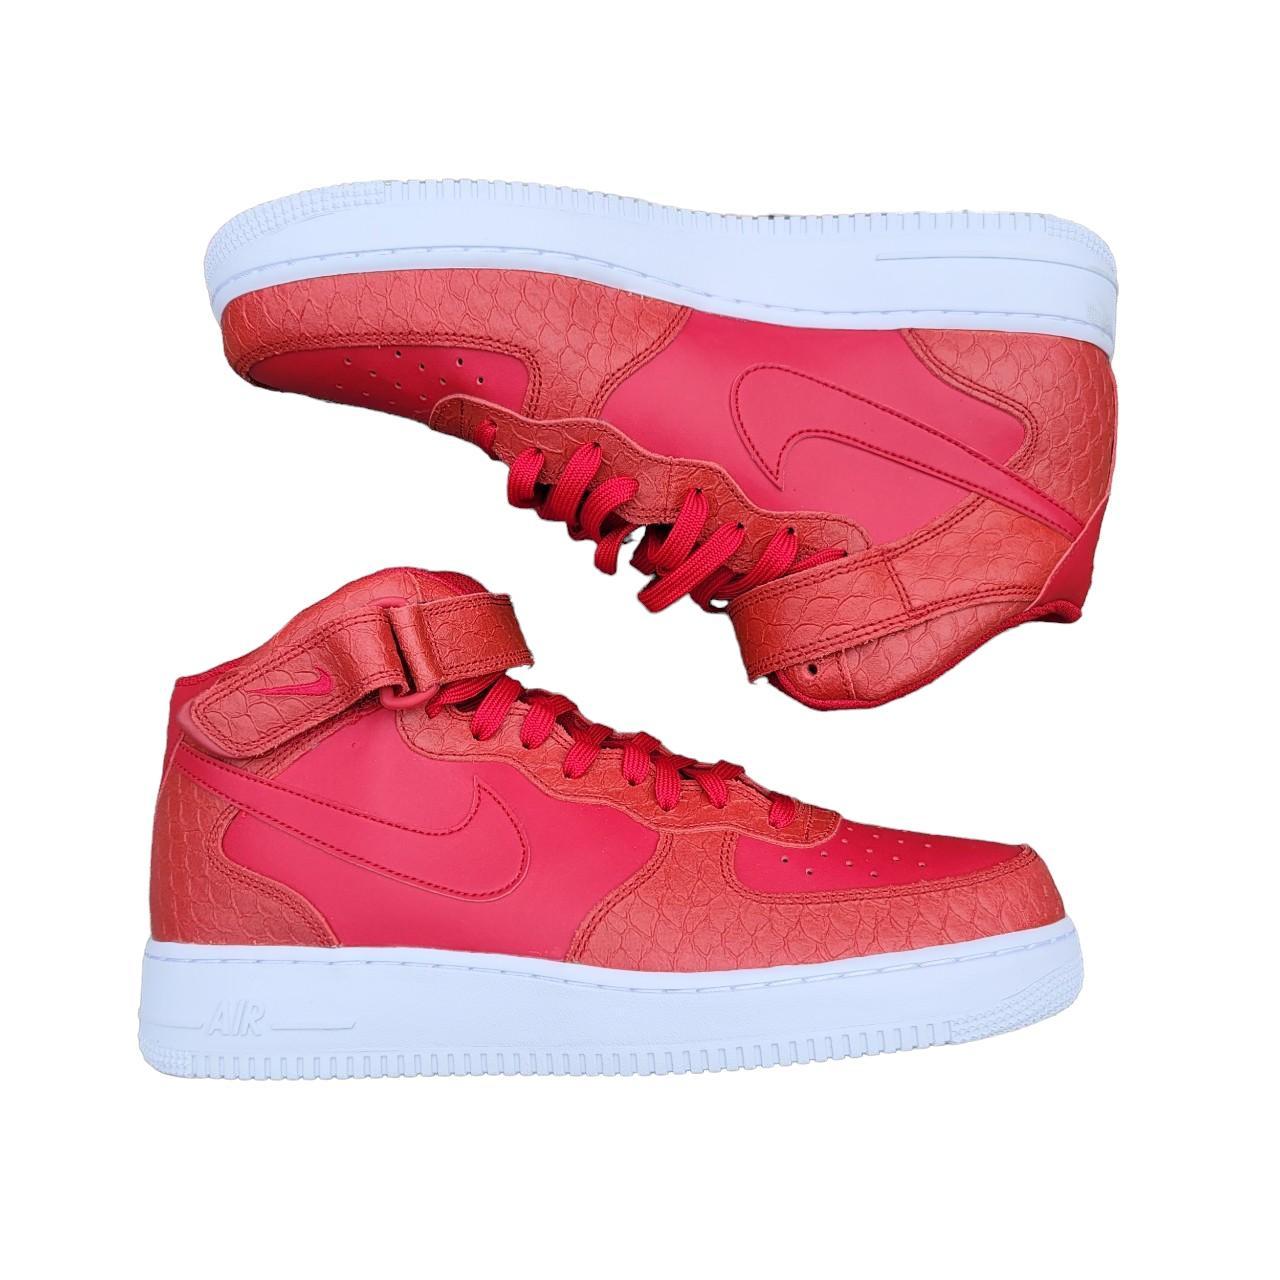 Nike Air Force 1 '07 LV8 1 Red / 10.5